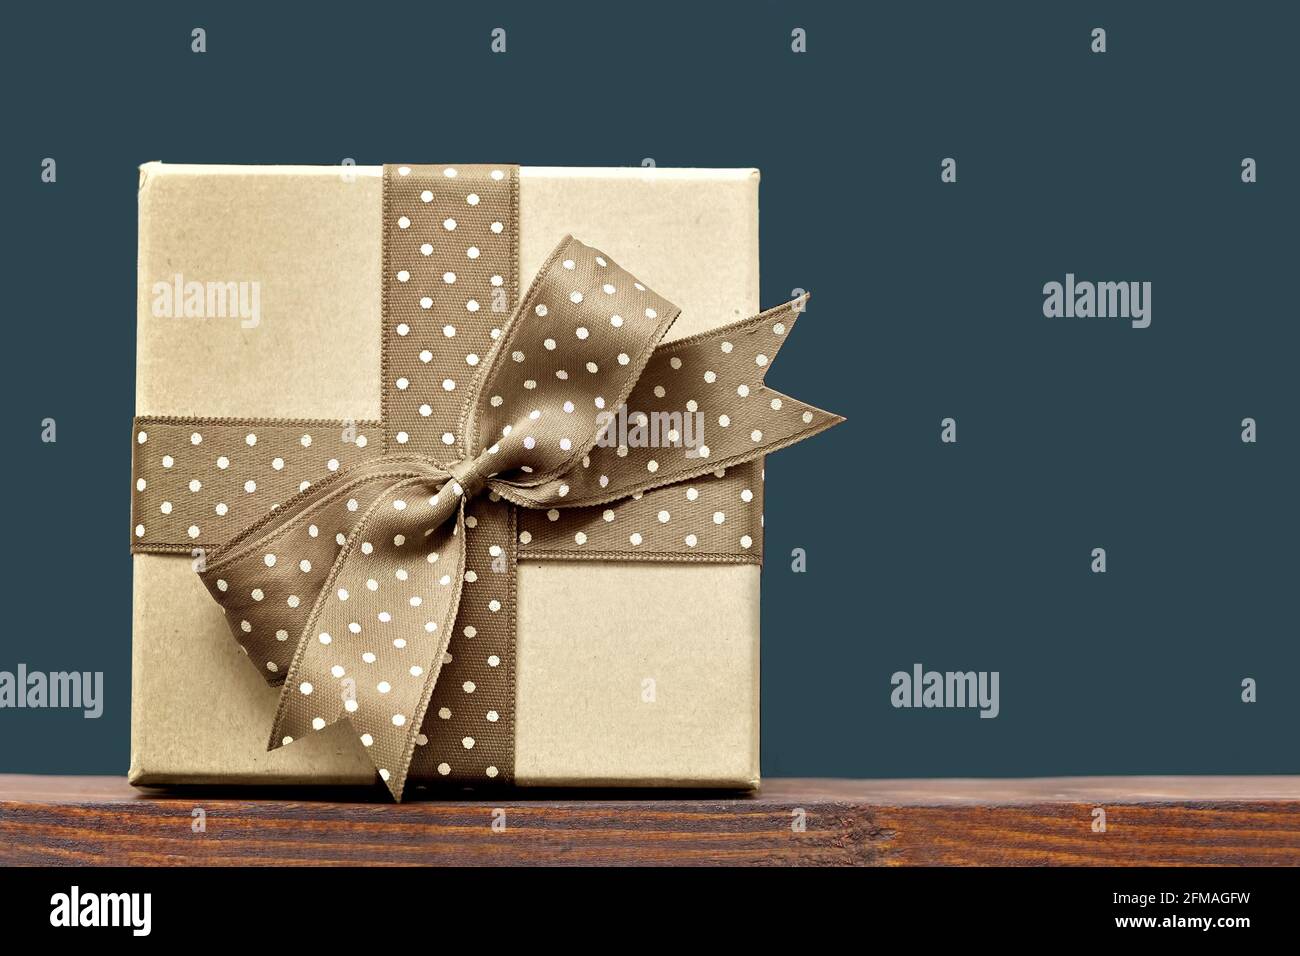 Fathers Day gift box on dark gray background with copy space Stock Photo